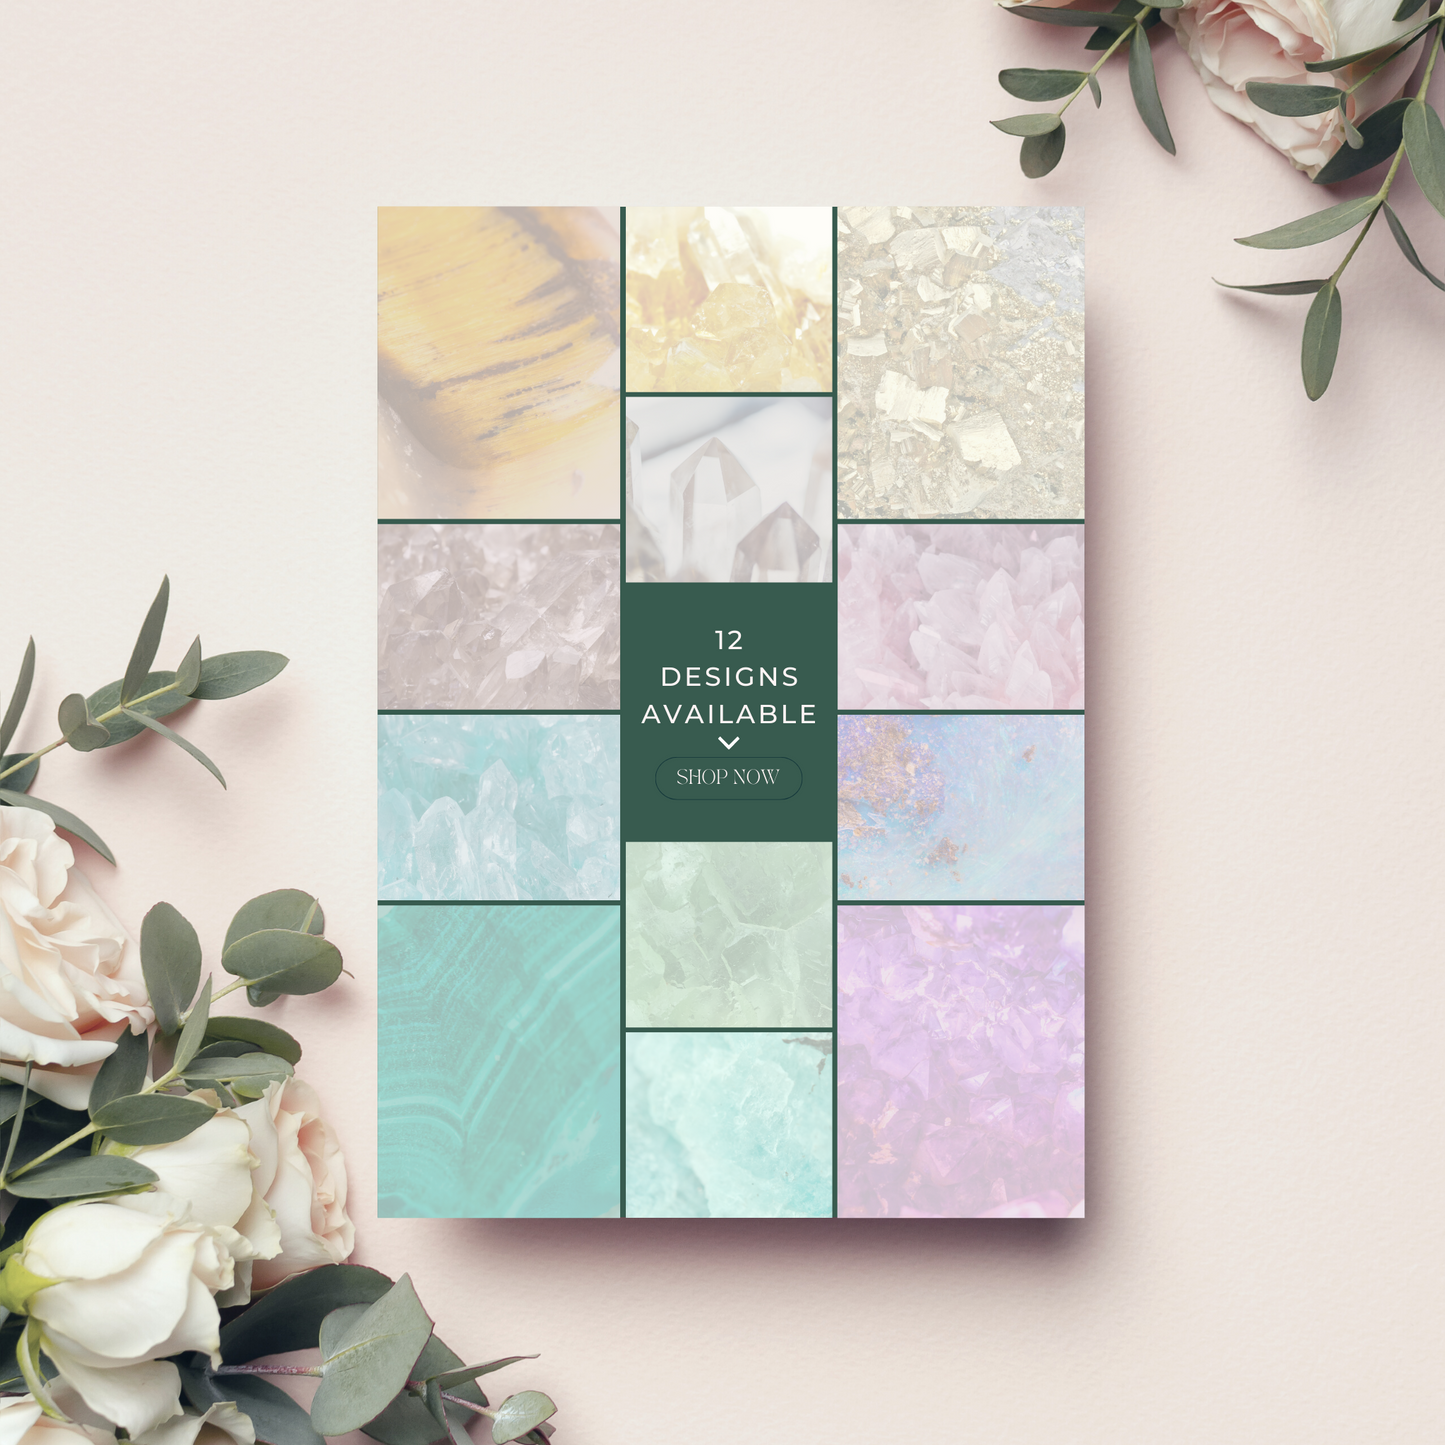 Daily Weekly Monthly Planner Set - Malachite